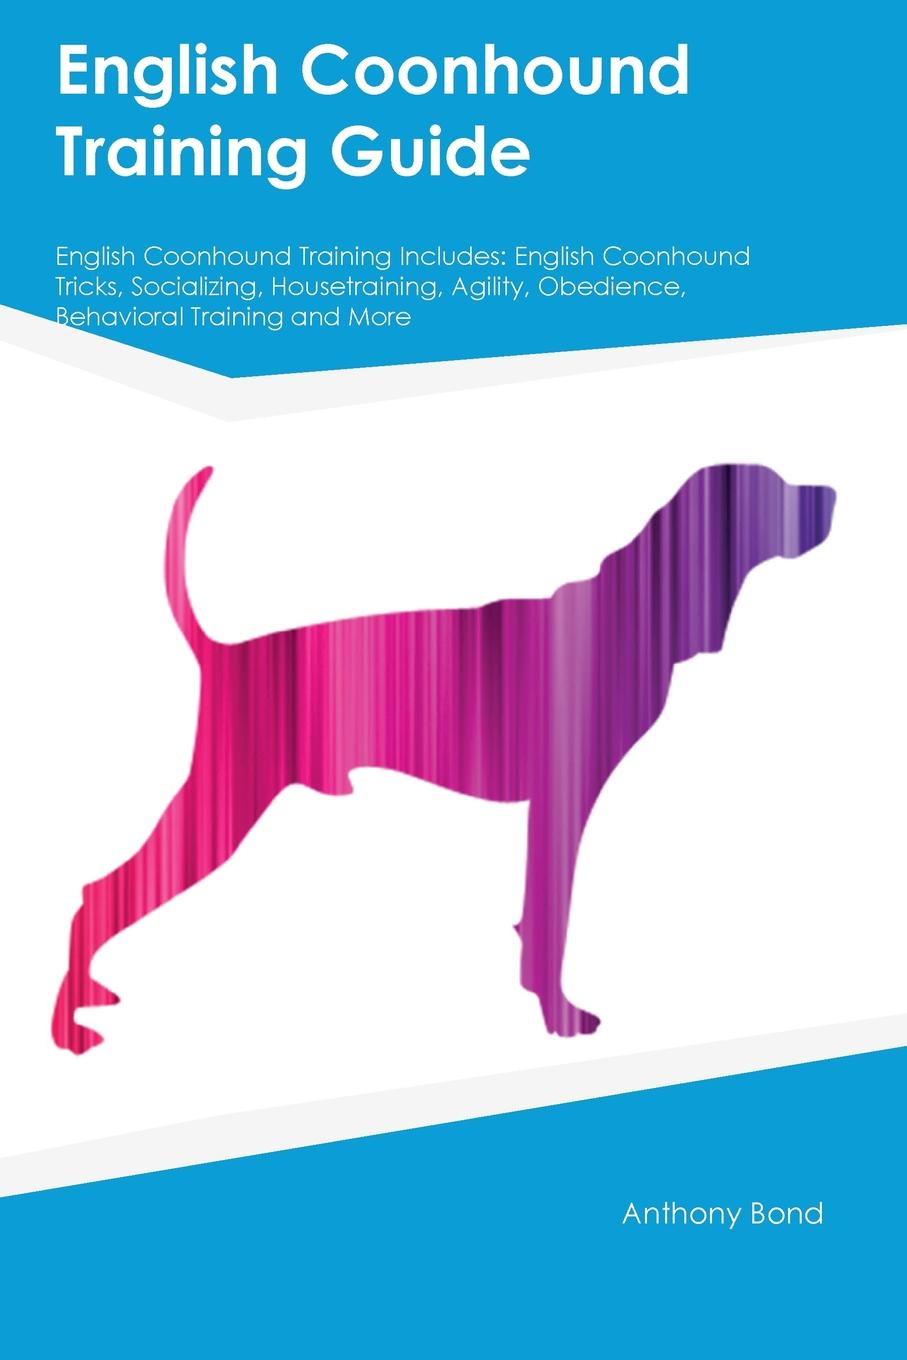 English Coonhound Training Guide English Coonhound Training Includes. English Coonhound Tricks, Socializing, Housetraining, Agility, Obedience, Behavioral Training and More